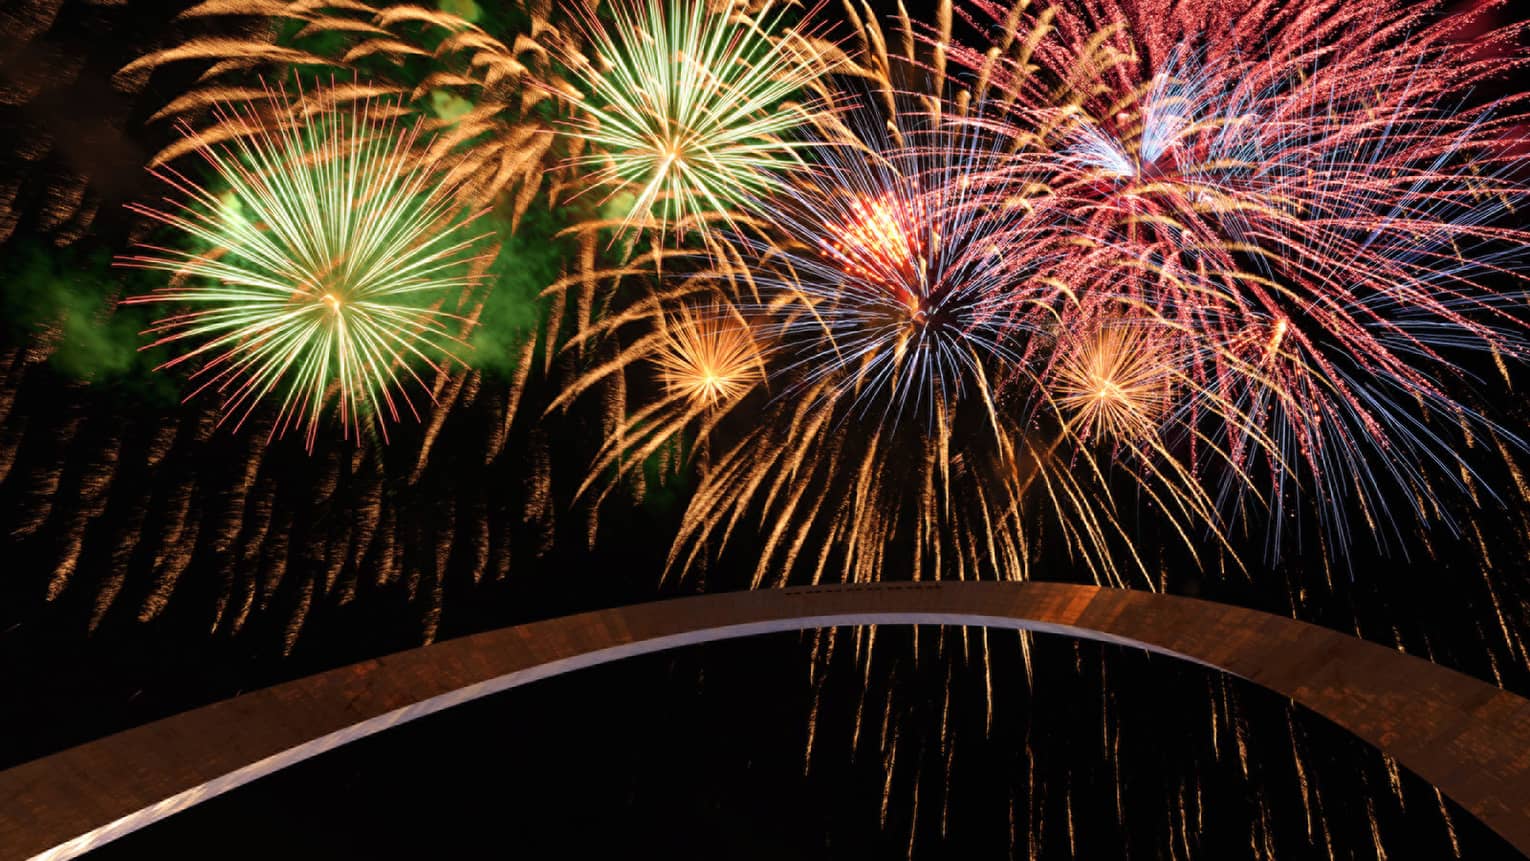 Colourful fireworks light up a night sky over Gateway Arch